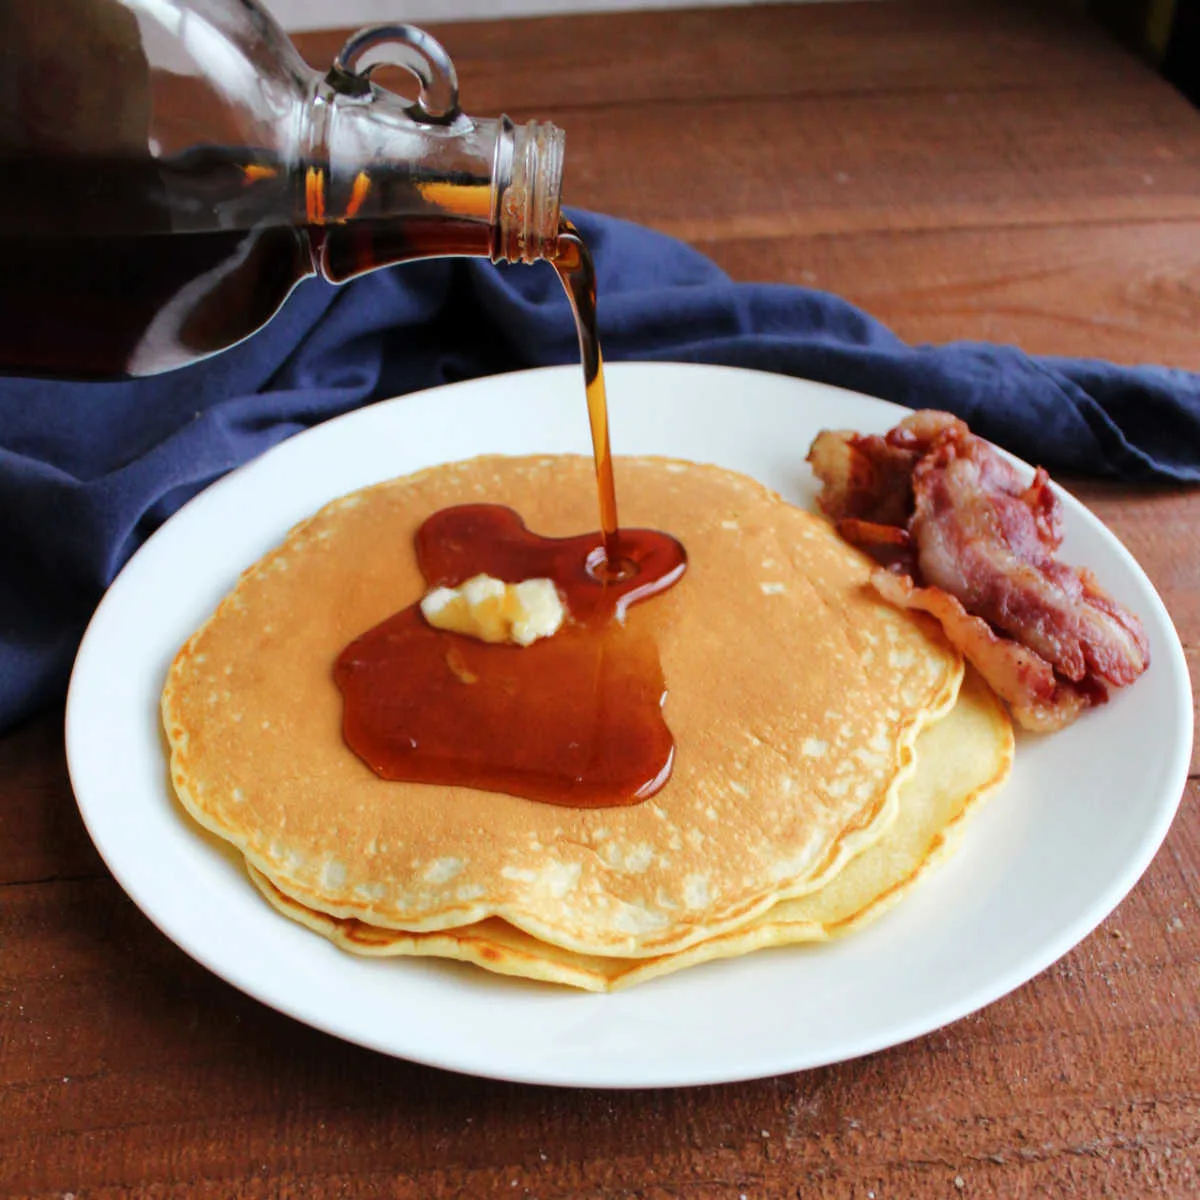 Pouring maple syrup over butter topped homemade pancakes served on plate with strips of bacon.